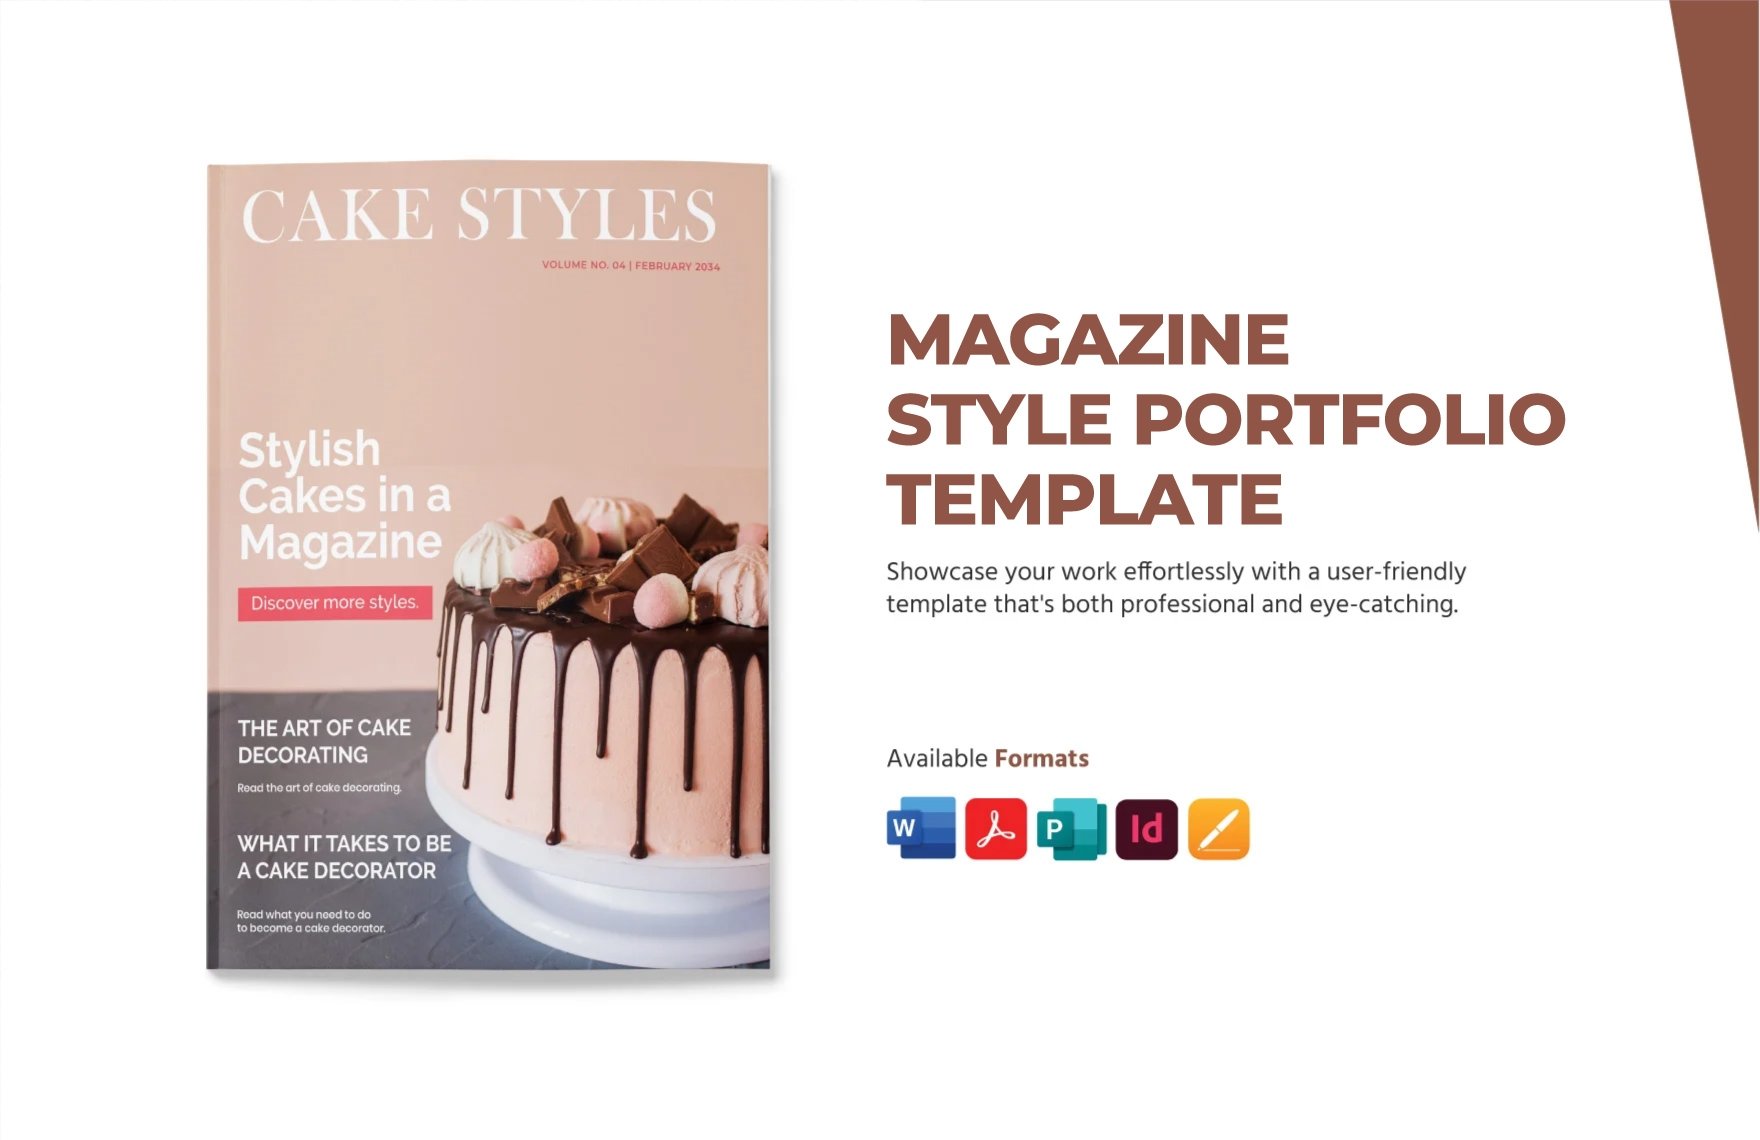 Free Magazine Style Portfolio Template in Word, Google Docs, PDF, Apple Pages, Publisher, InDesign